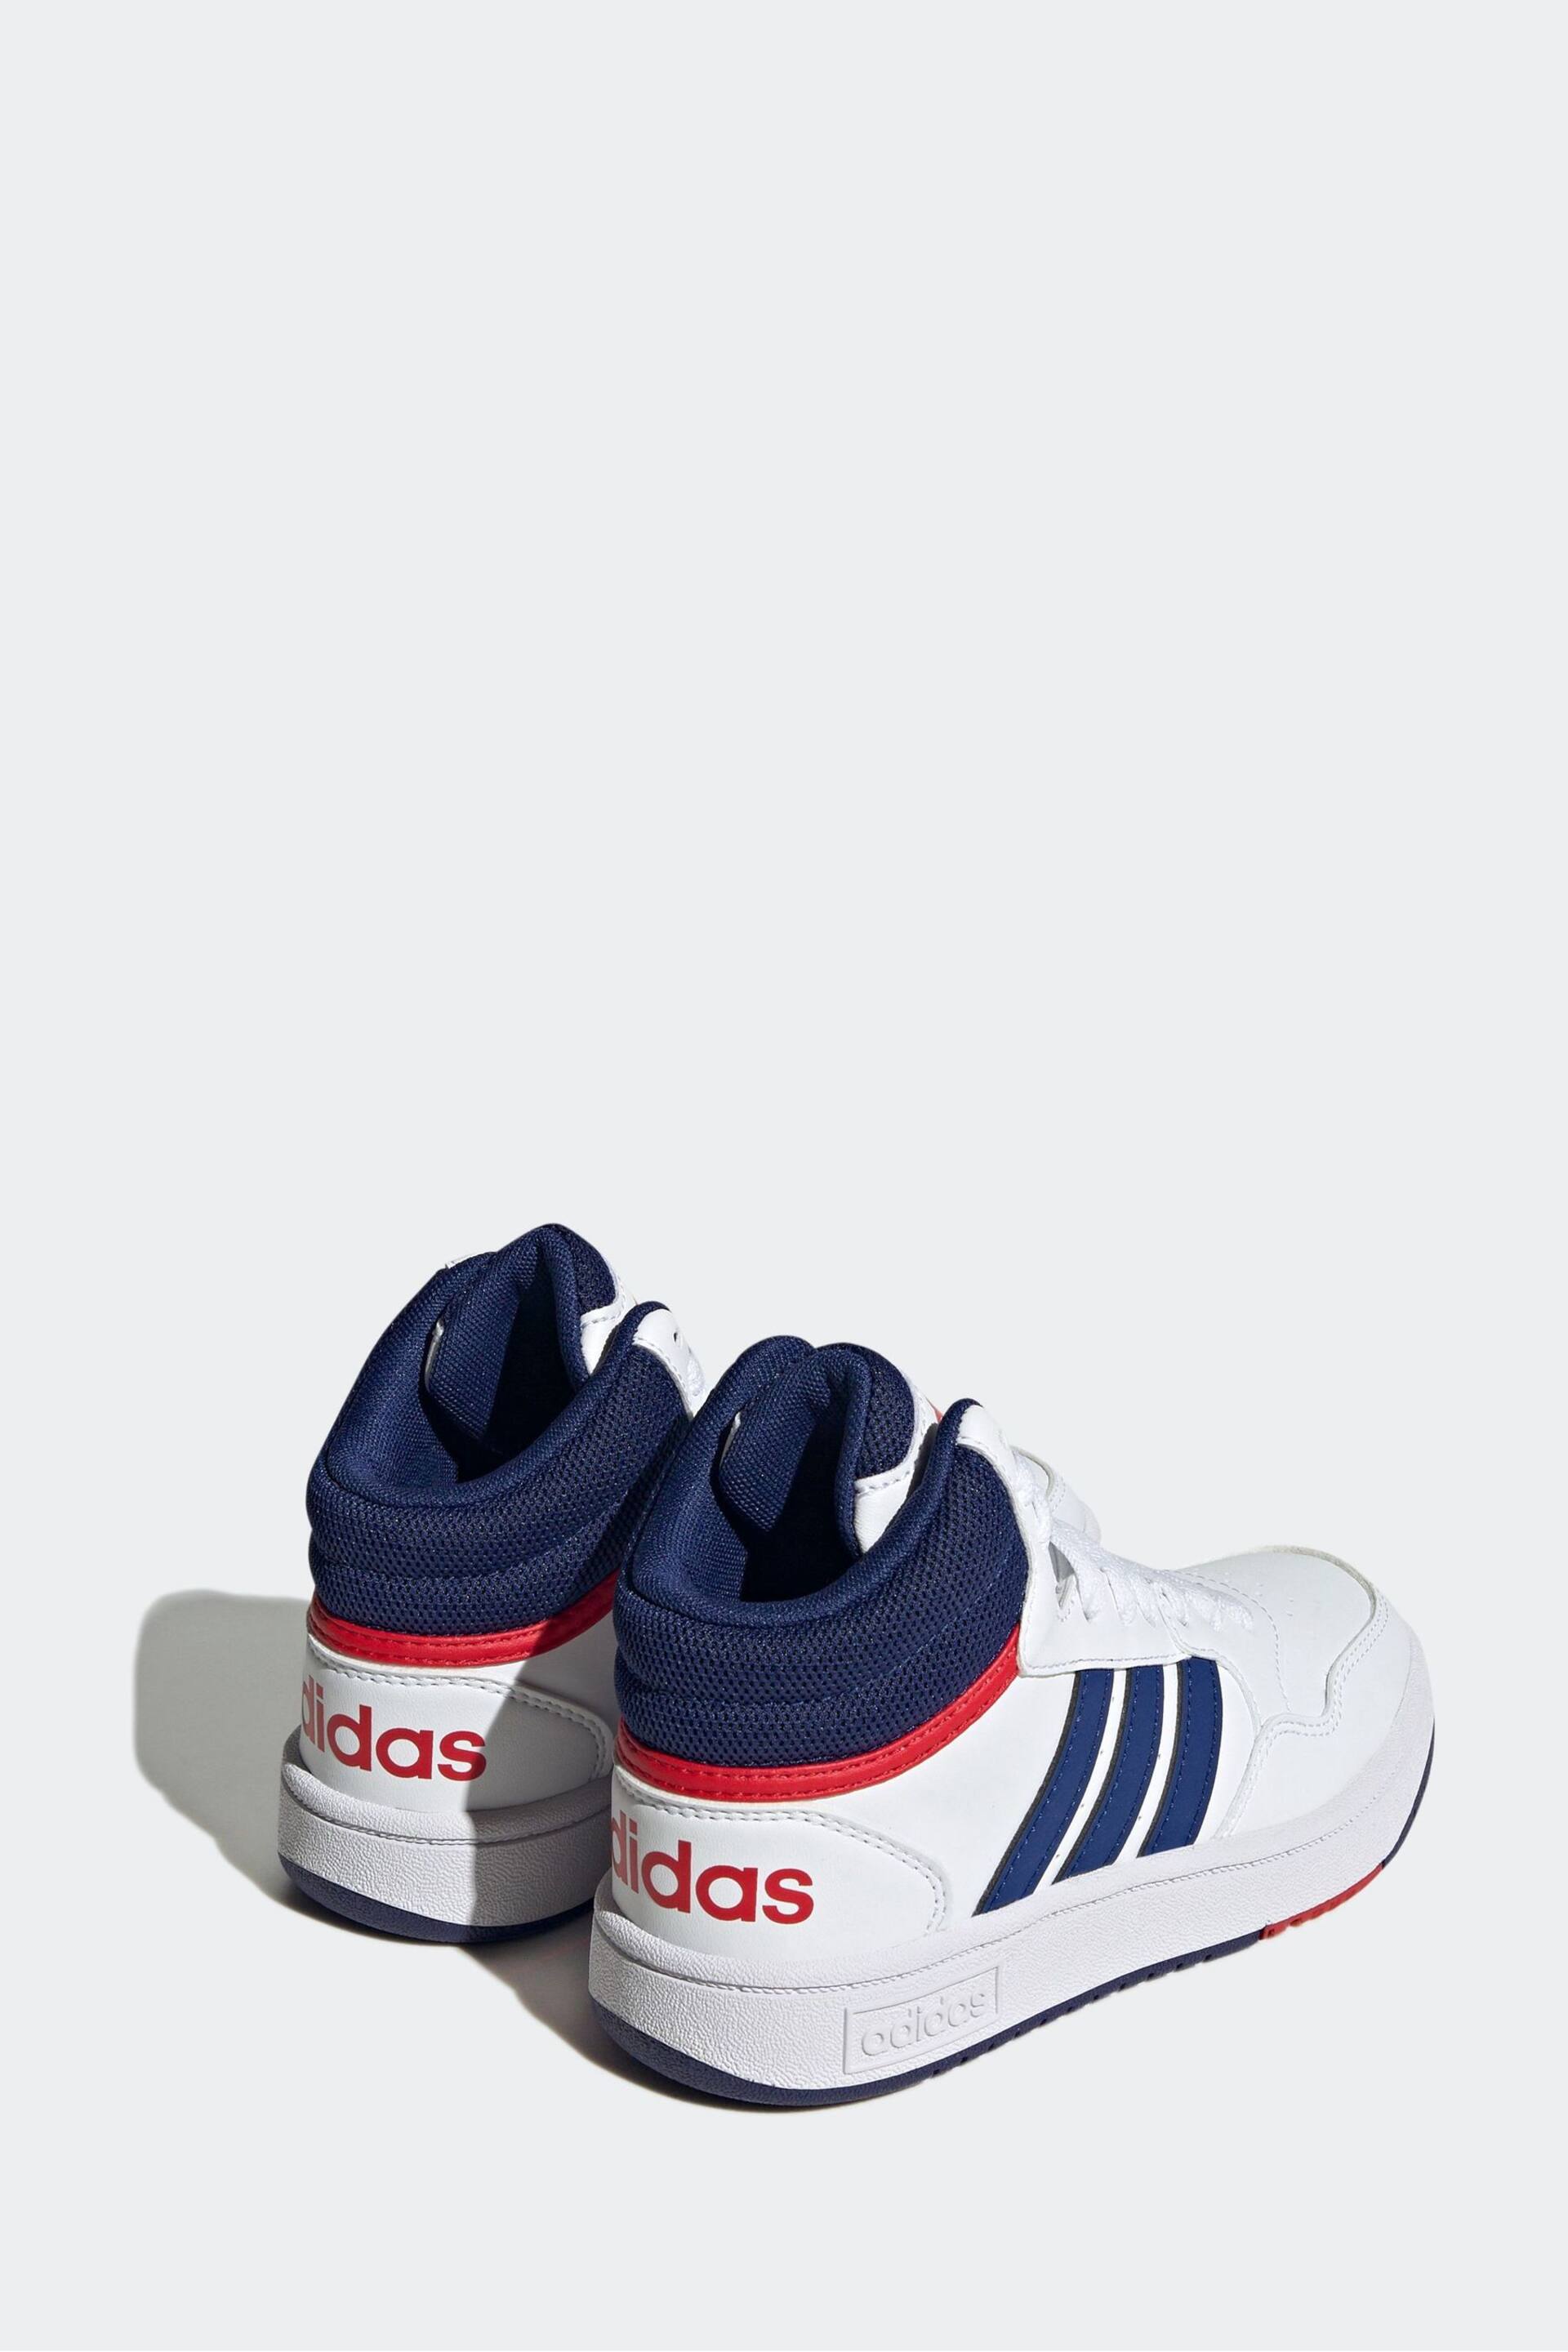 adidas White/Blue Hoops Mid Shoes - Image 4 of 9